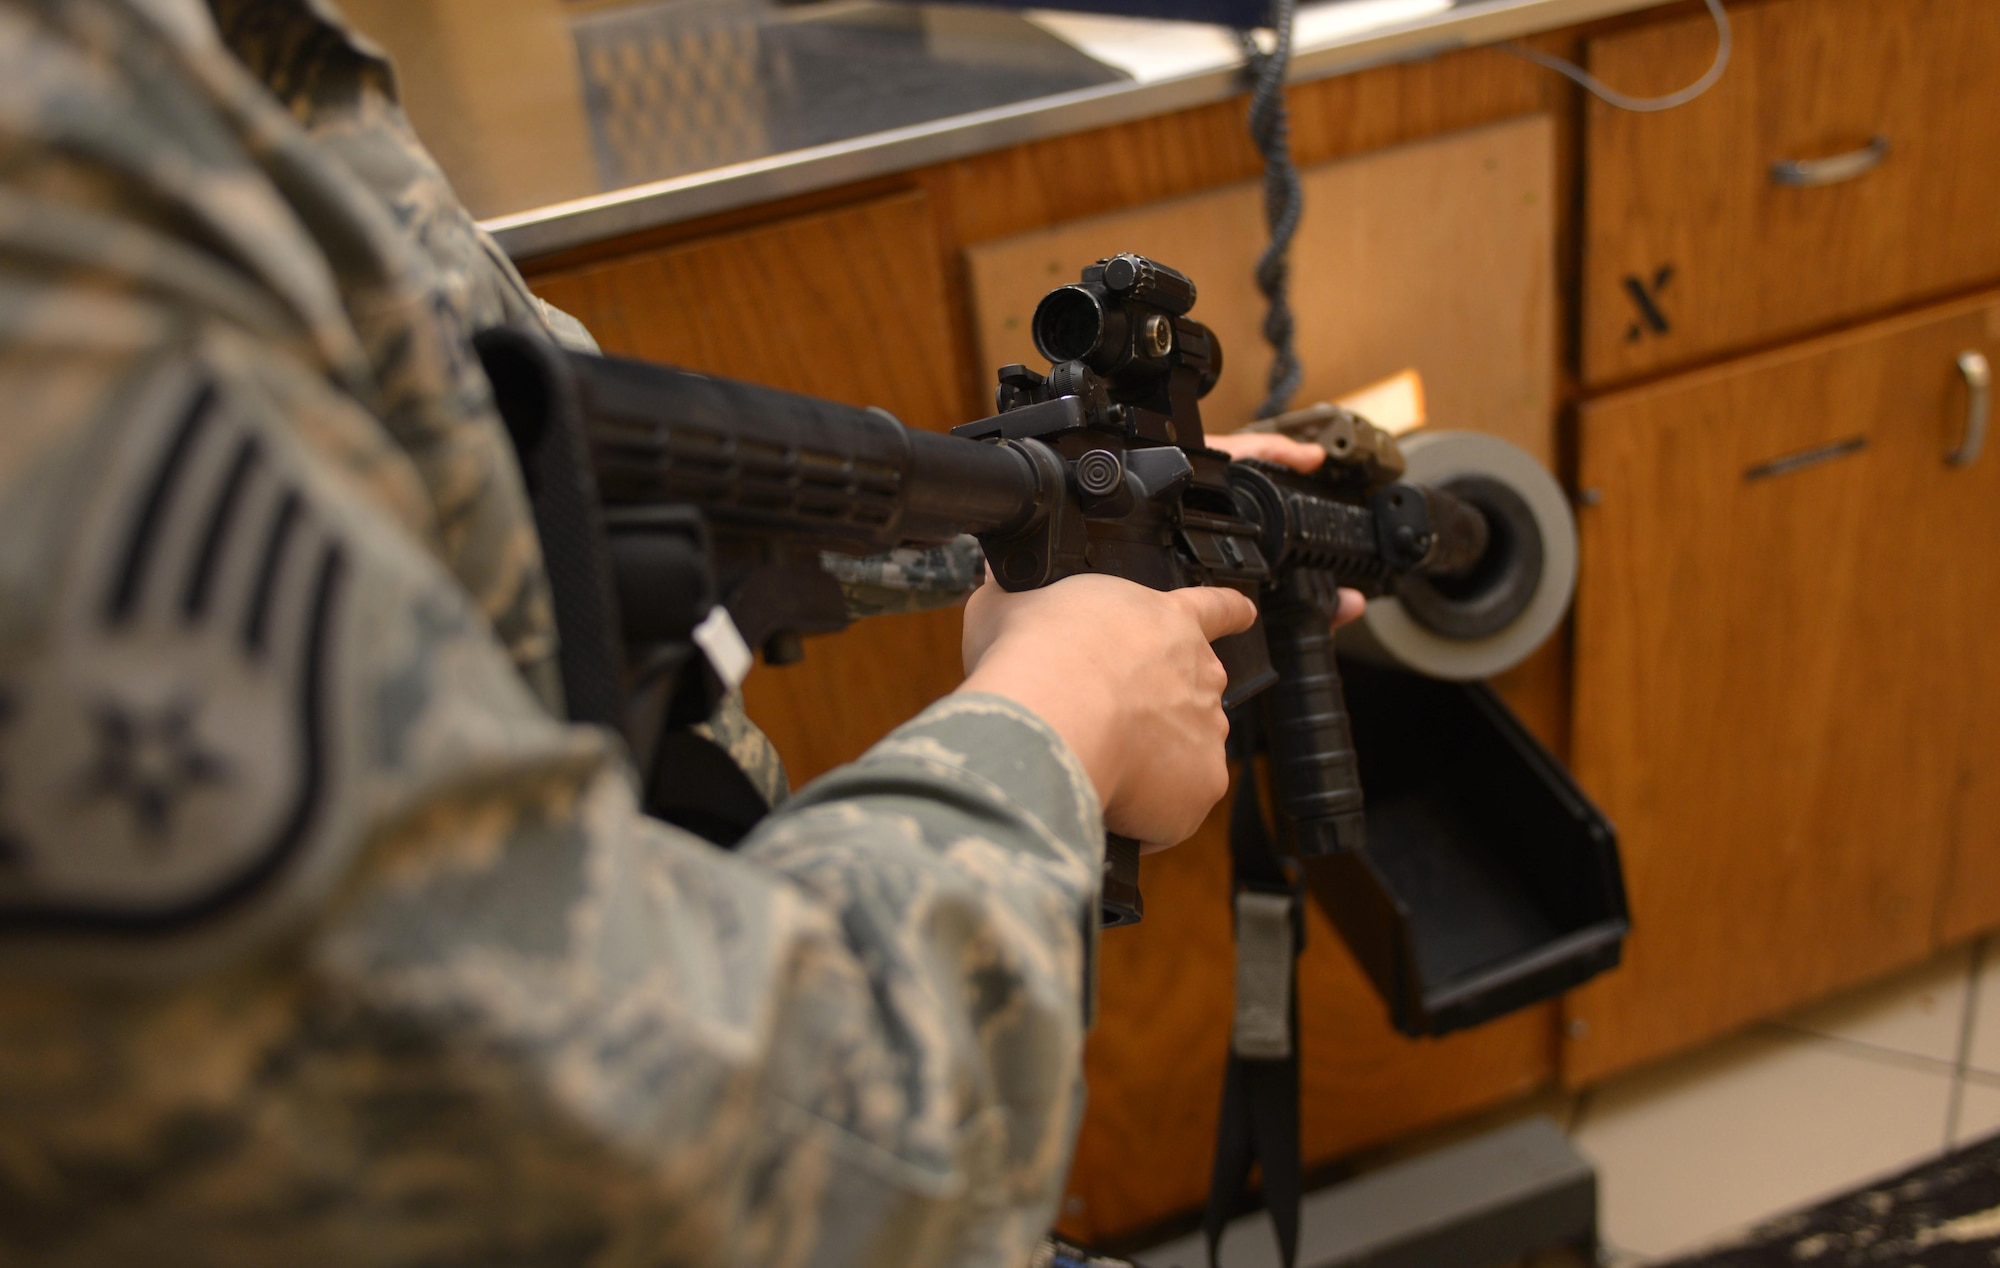 Staff Sergeant Elizabeth Gregson, the armory non-commissioned officer in charge assigned to the 28th Security Forces Squadron, clears an M4 carbine rifle in the armory at Ellsworth AFB, S.D., Oct. 26, 2016. Aside from issuing and accepting gear, armorers must account for every piece of equipment each day to ensure it is all accounted for and in safe hands. (U.S. Air Force photo by Airman 1st Class Donald Knechtel)